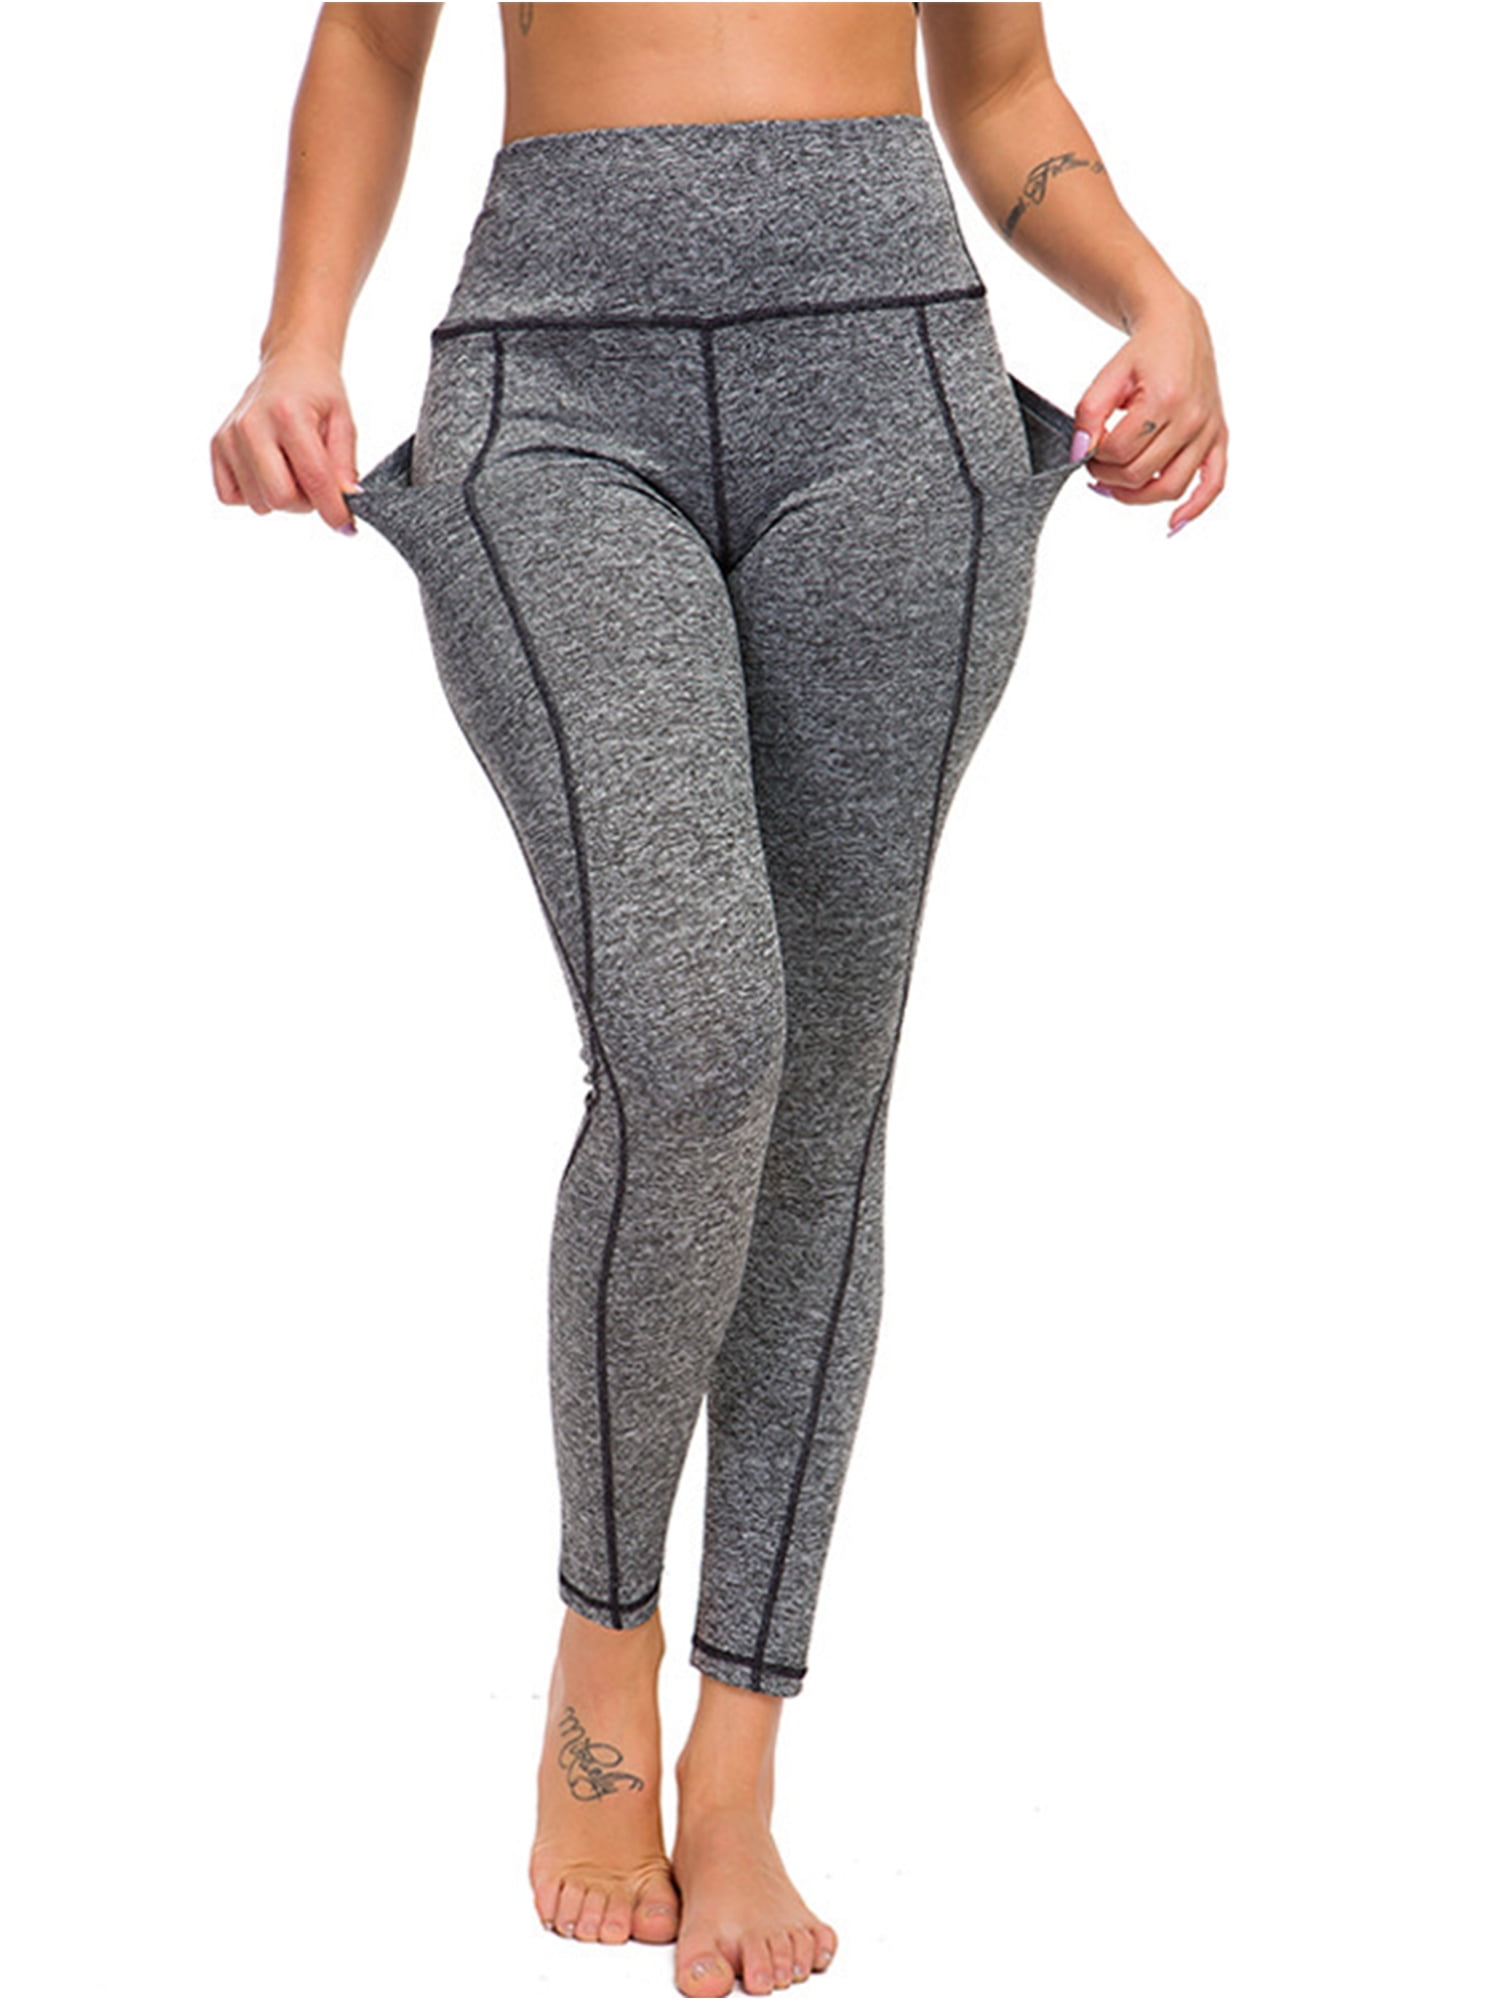 Womens Activewear Yoga Leggings Workout Jogging Pants Fitness Tight Trousers Hot 